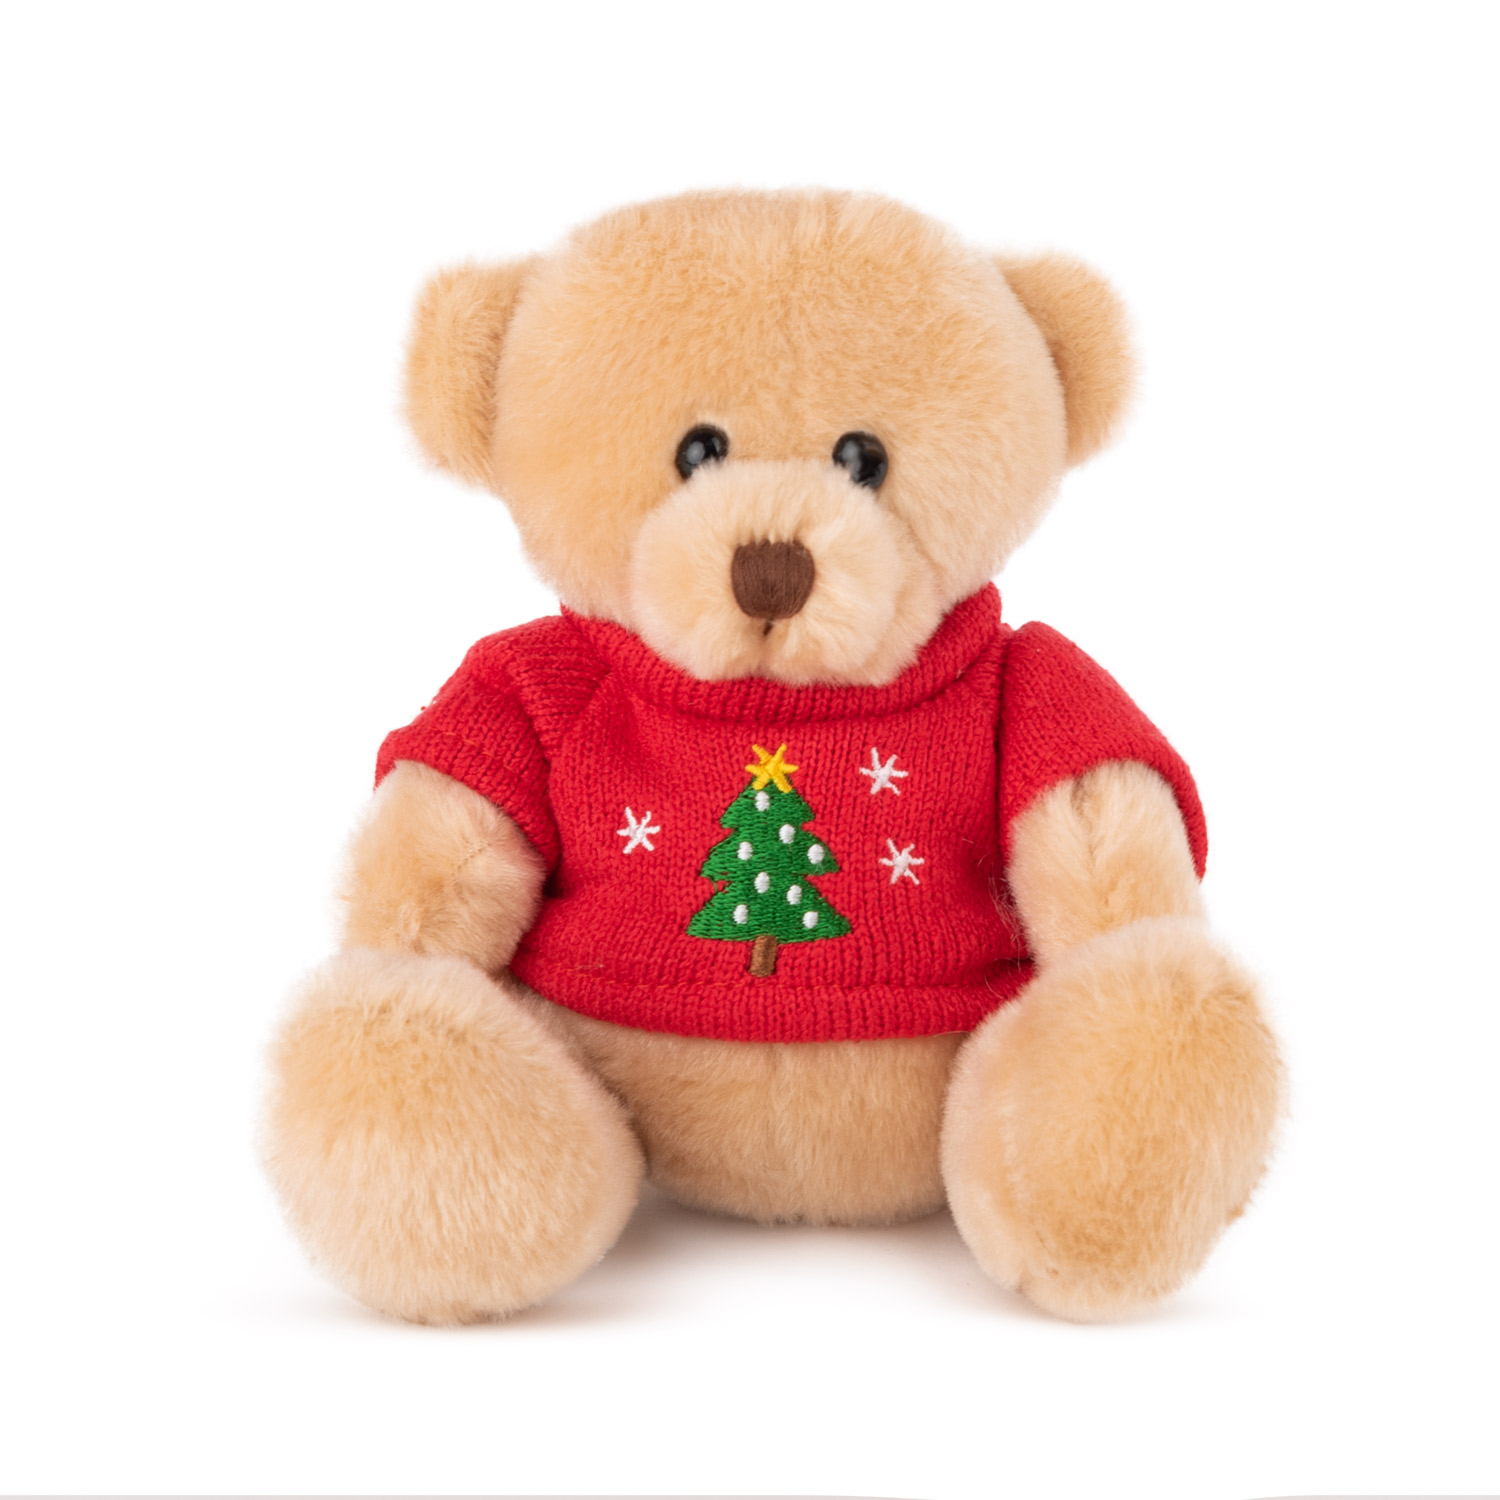 Bear with Christmas sweater - Beige